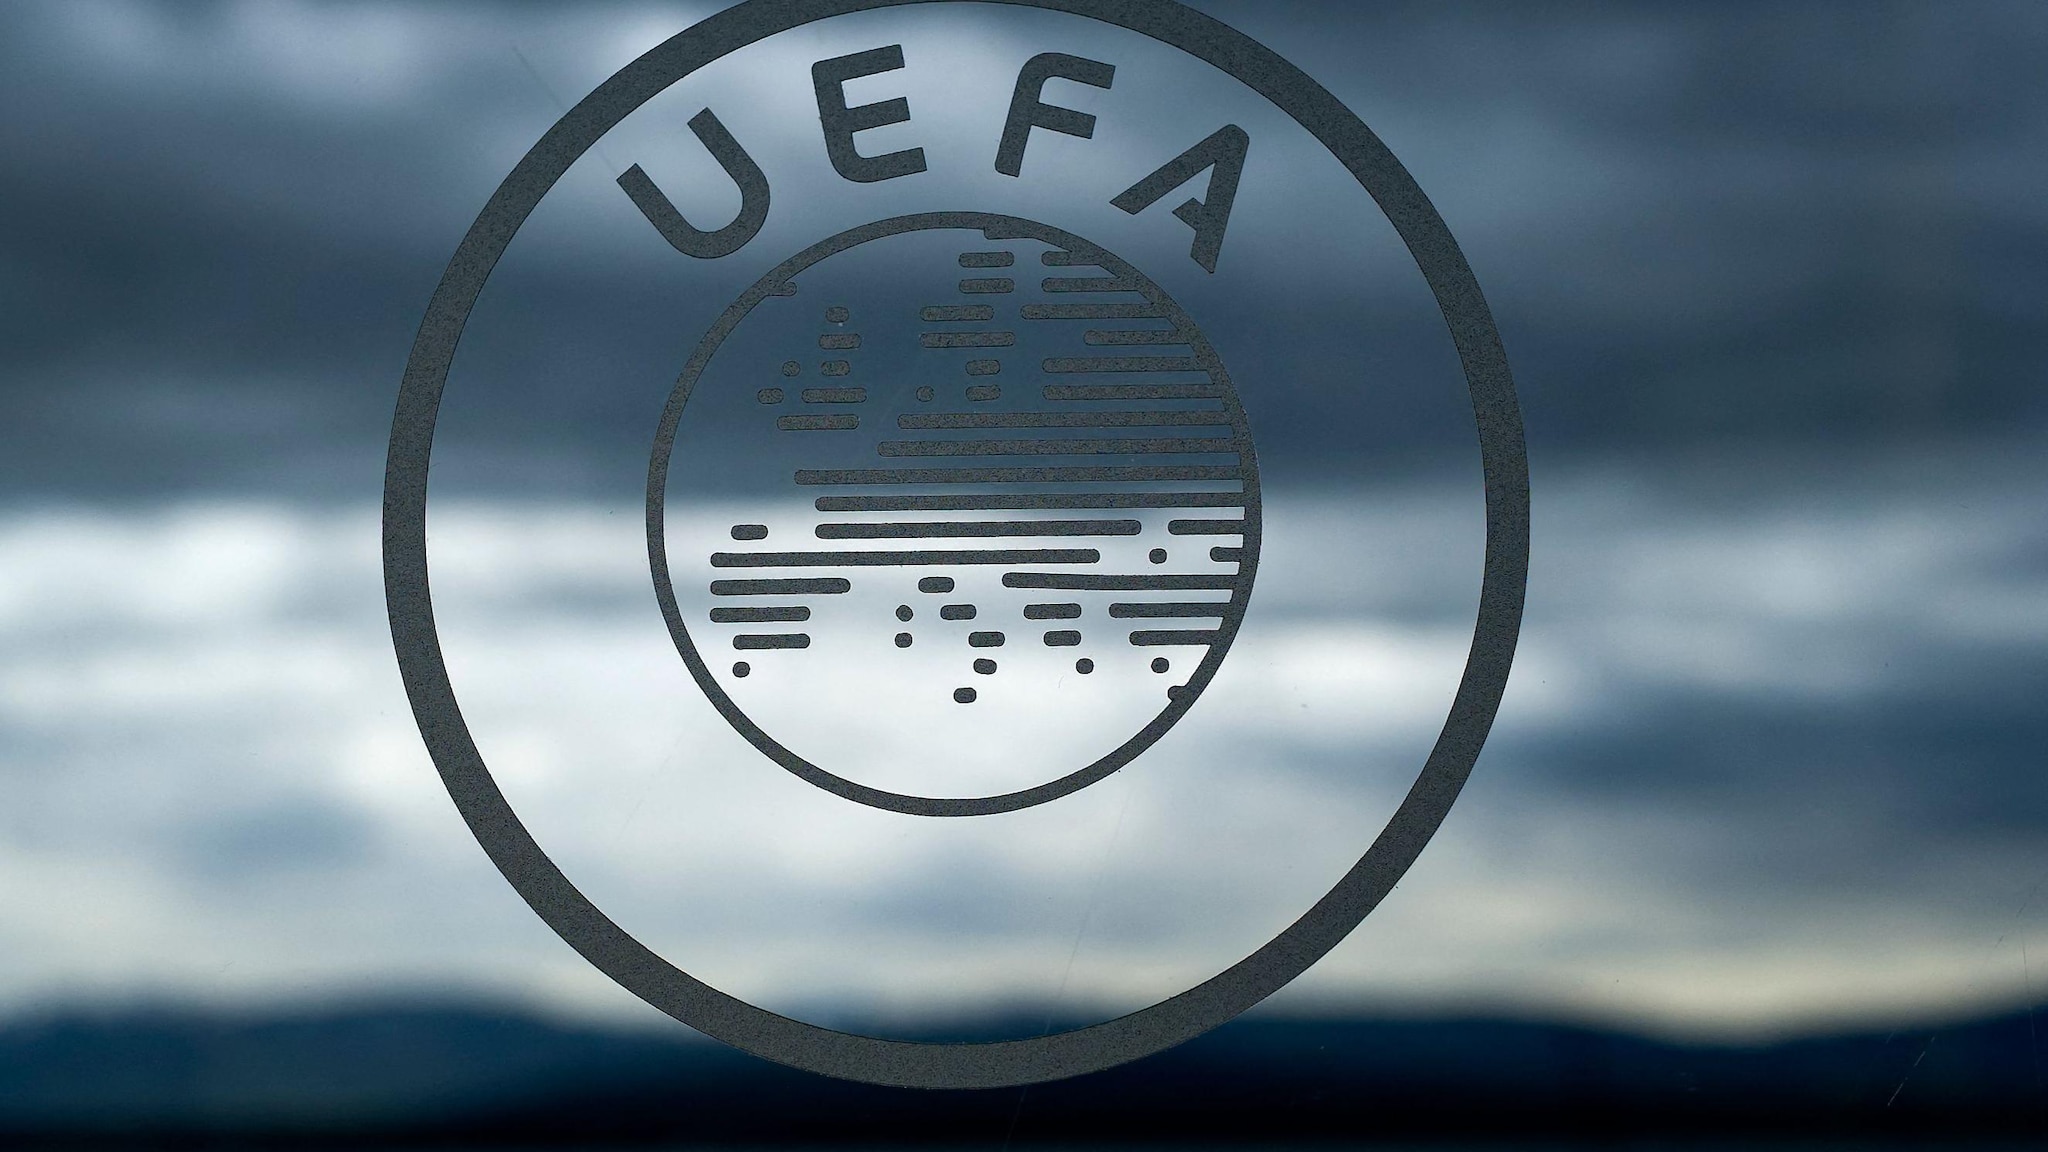 UEFA's response to A22 Sports' latest statement |  UEFA